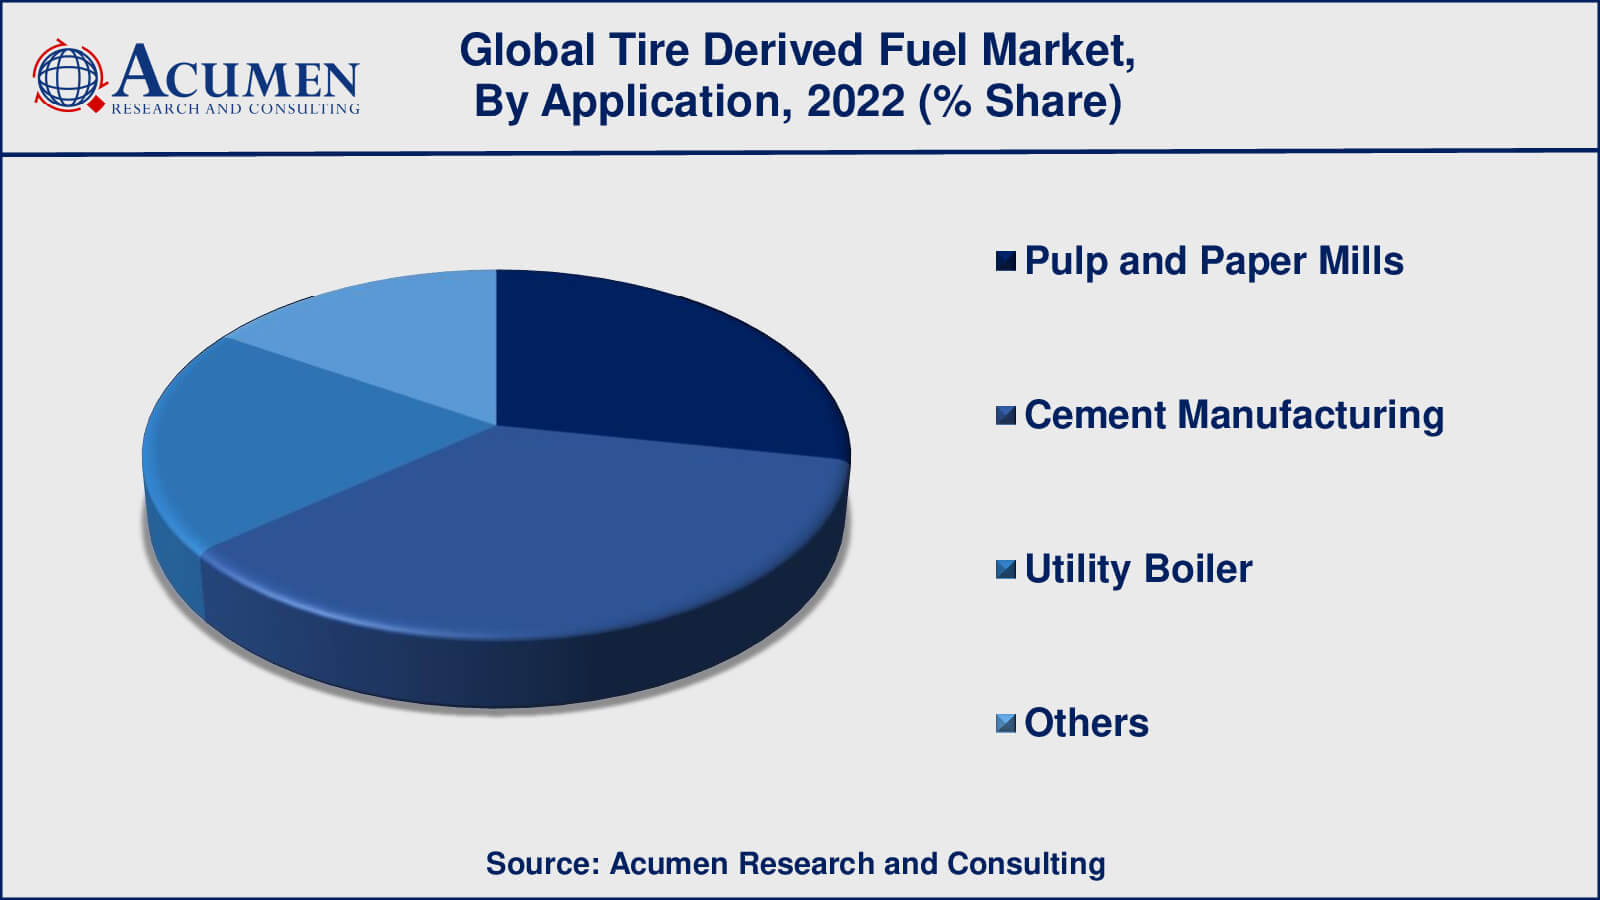 Tire Derived Fuel Market Drivers